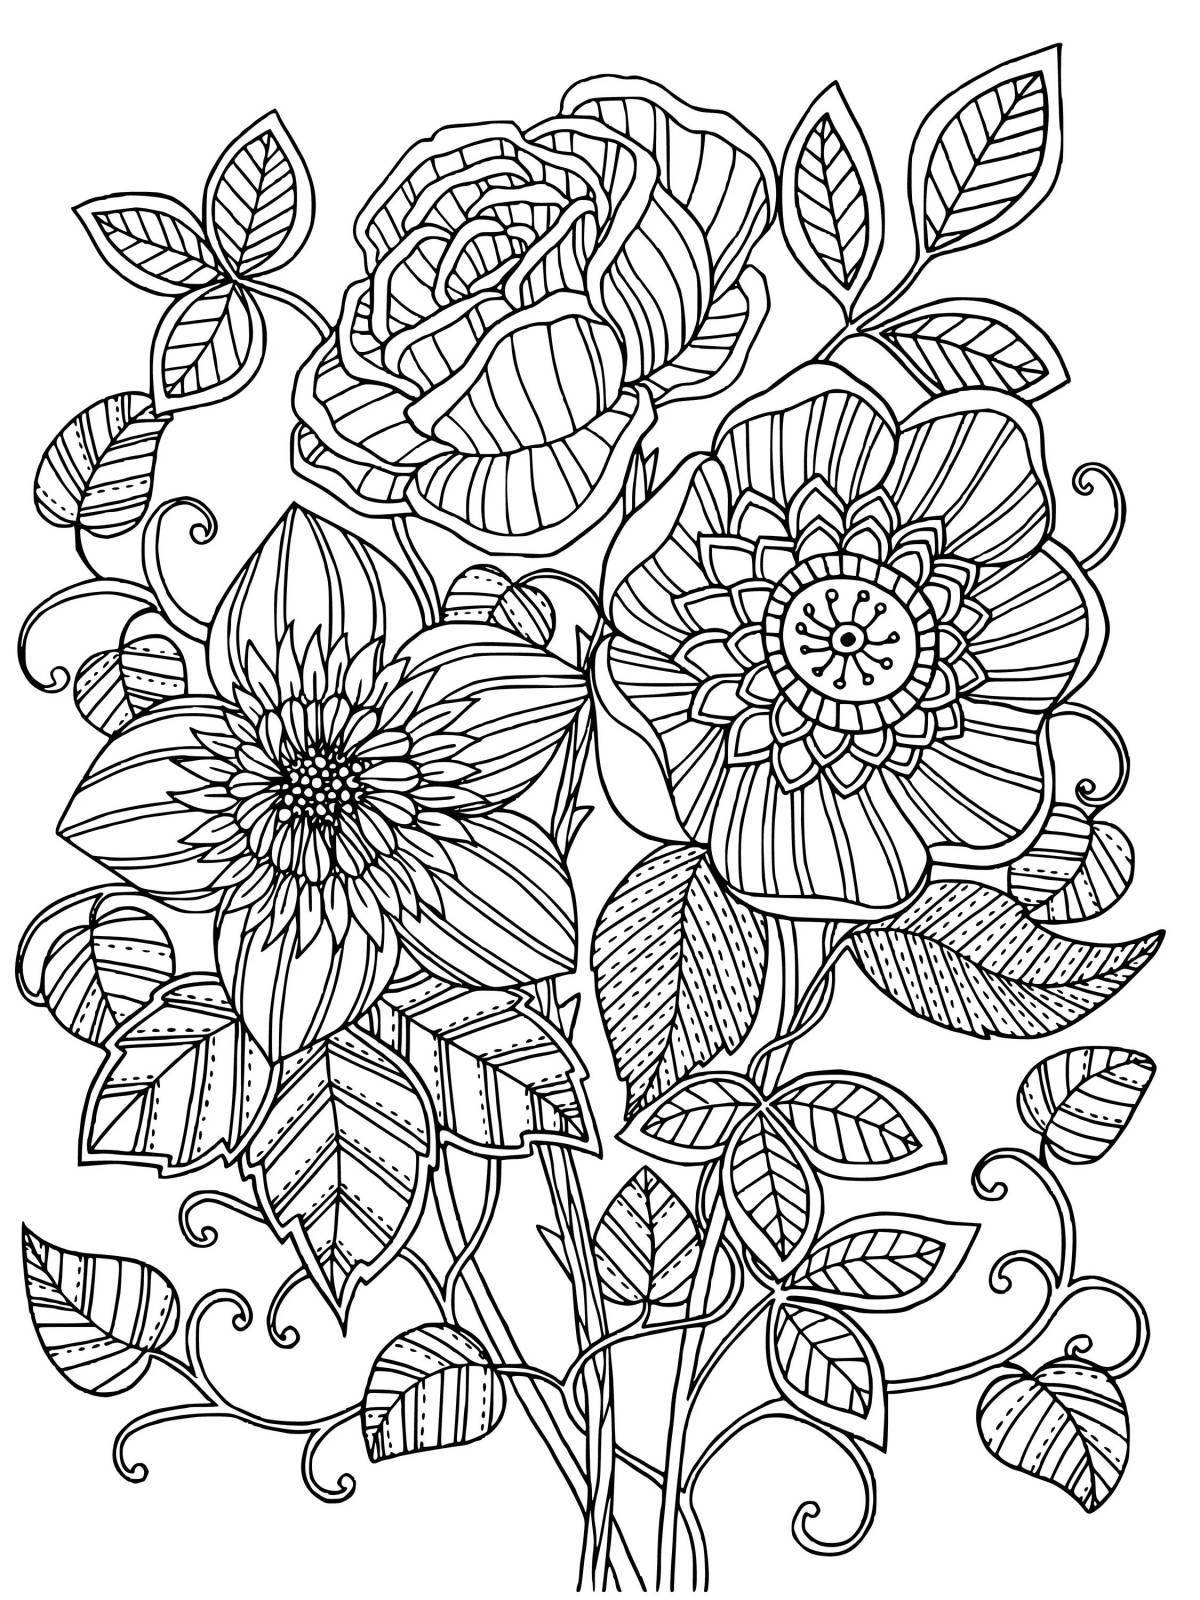 Sublime coloring page beautiful and complex flowers